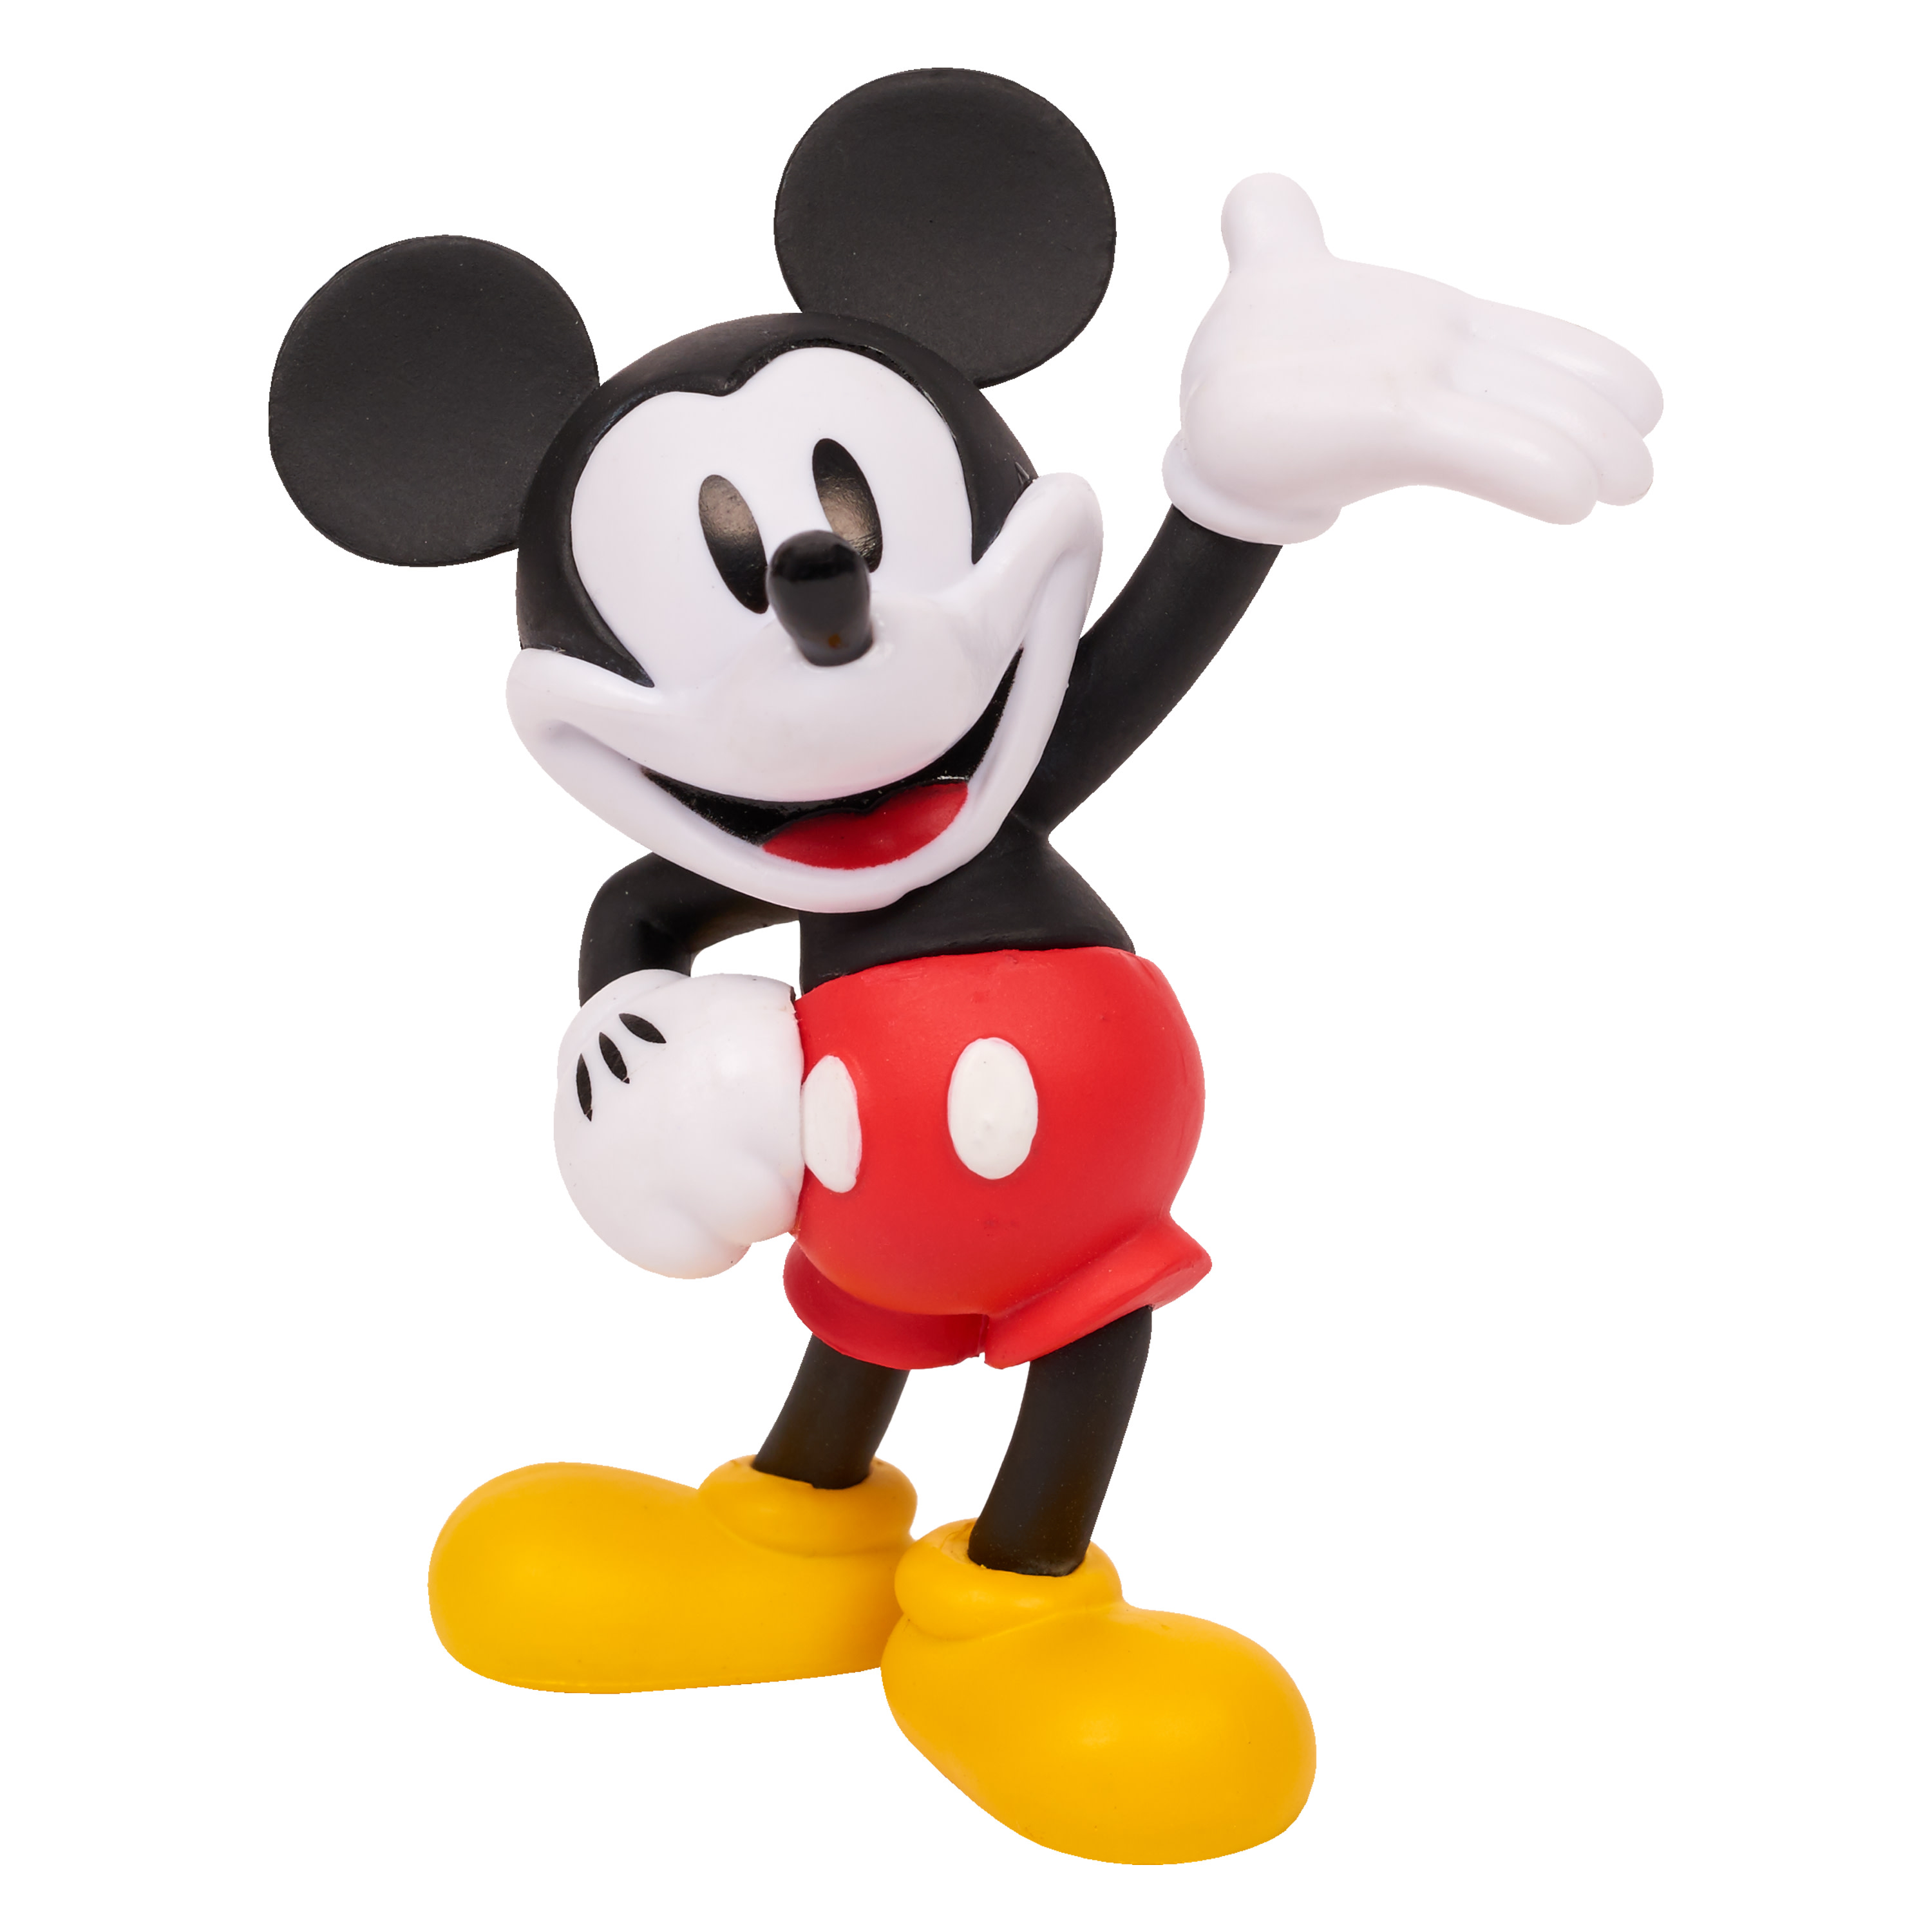 Mickey Mouse 90th Anniversary 10-Piece Collectible Figure Set,  Kids Toys for Ages 3 Up, Gifts and Presents - image 3 of 12